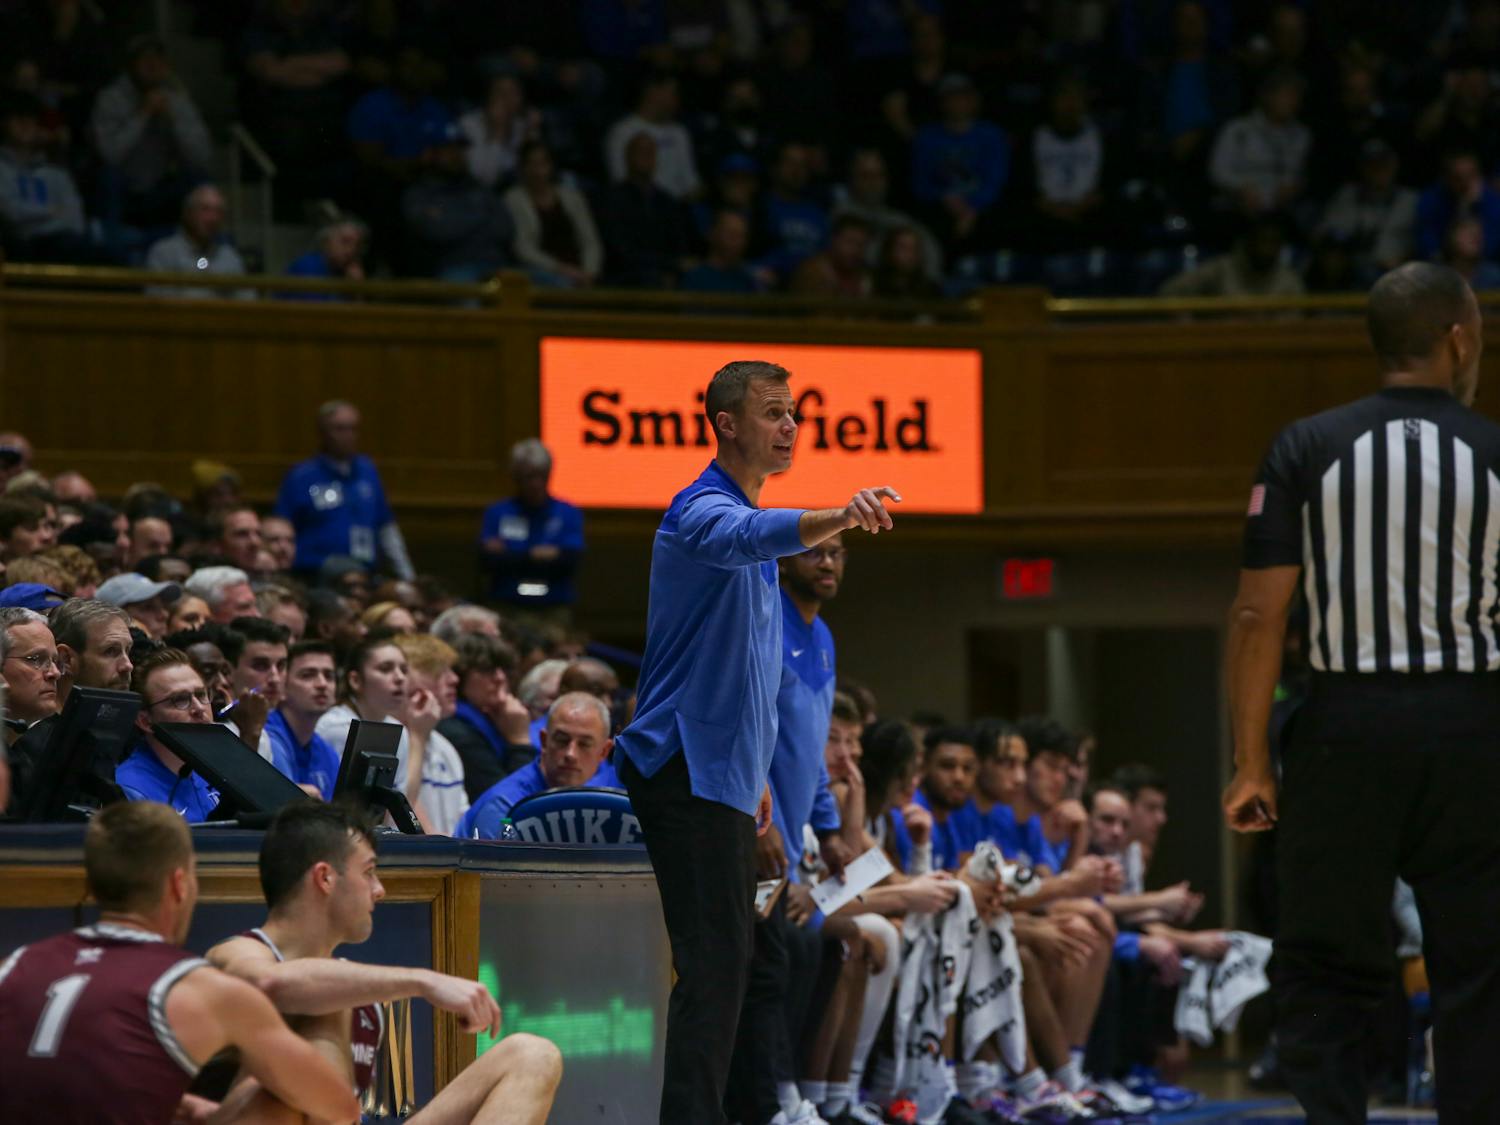 Begovich is the only new transfer thus far on head coach Jon Scheyer's roster for his second season at the helm.